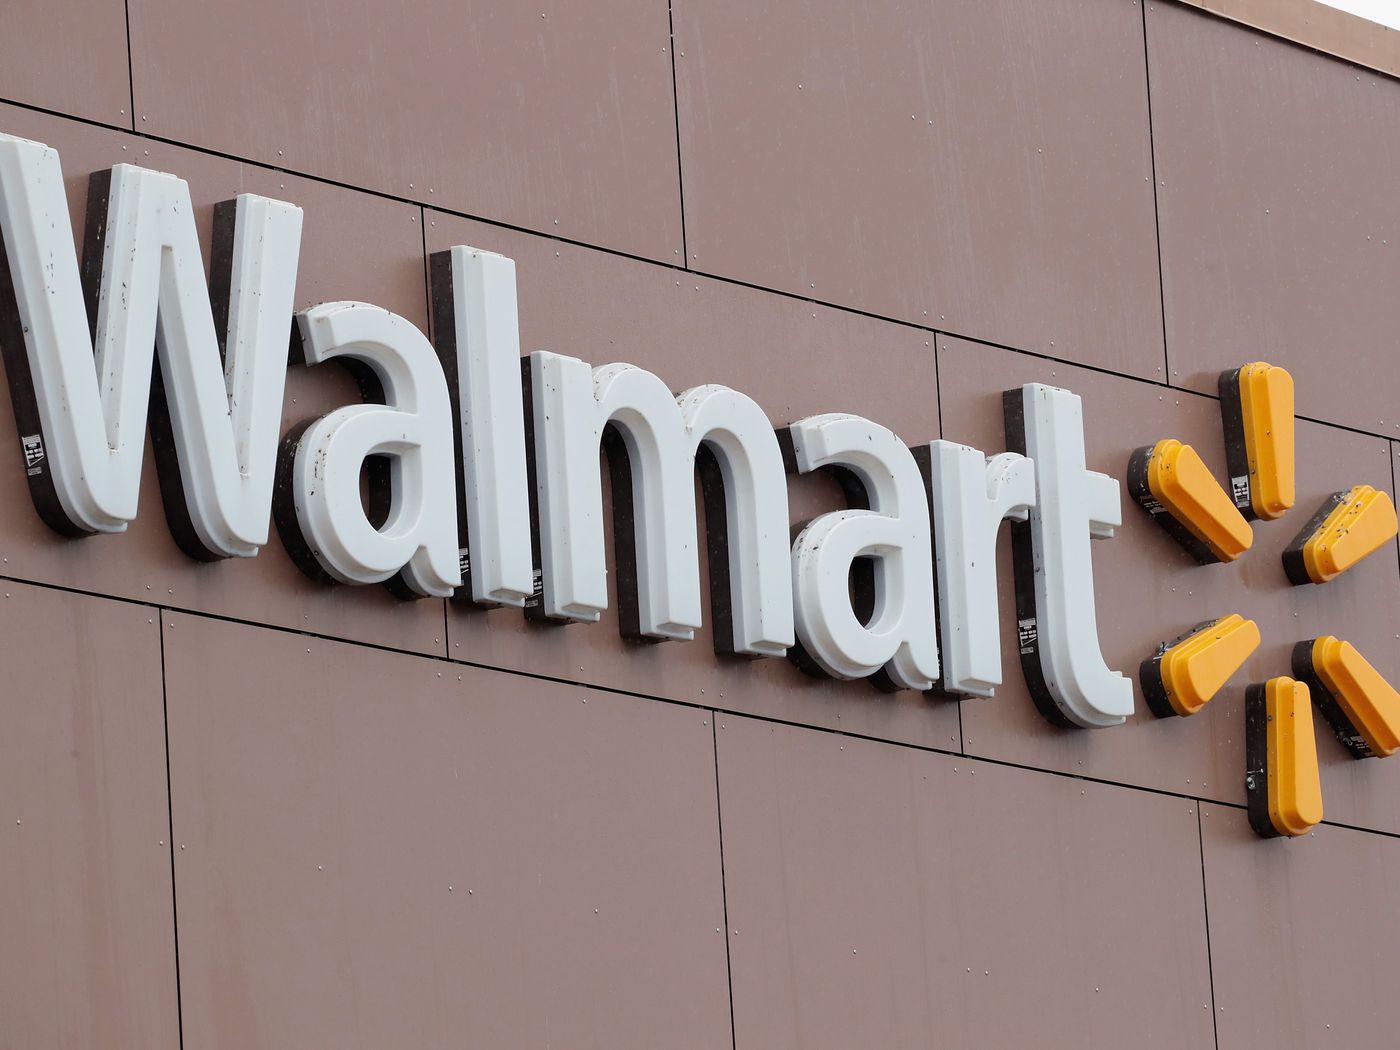 Walmart Wrong Price Policy In 2022 (All You Need To Know!)